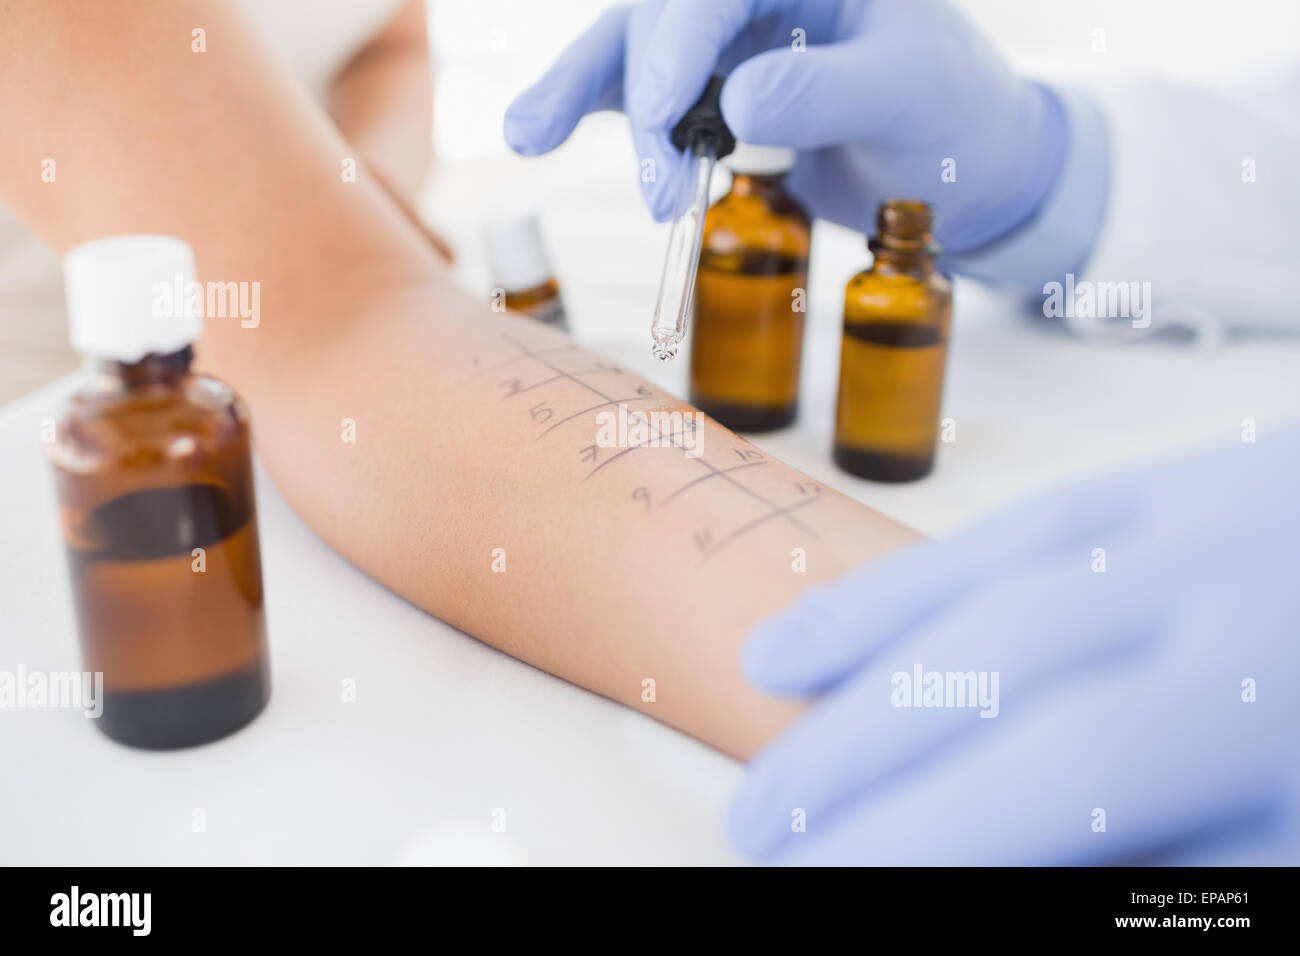 Physiotherapist dropping medicine on hand of patient Stock Photo